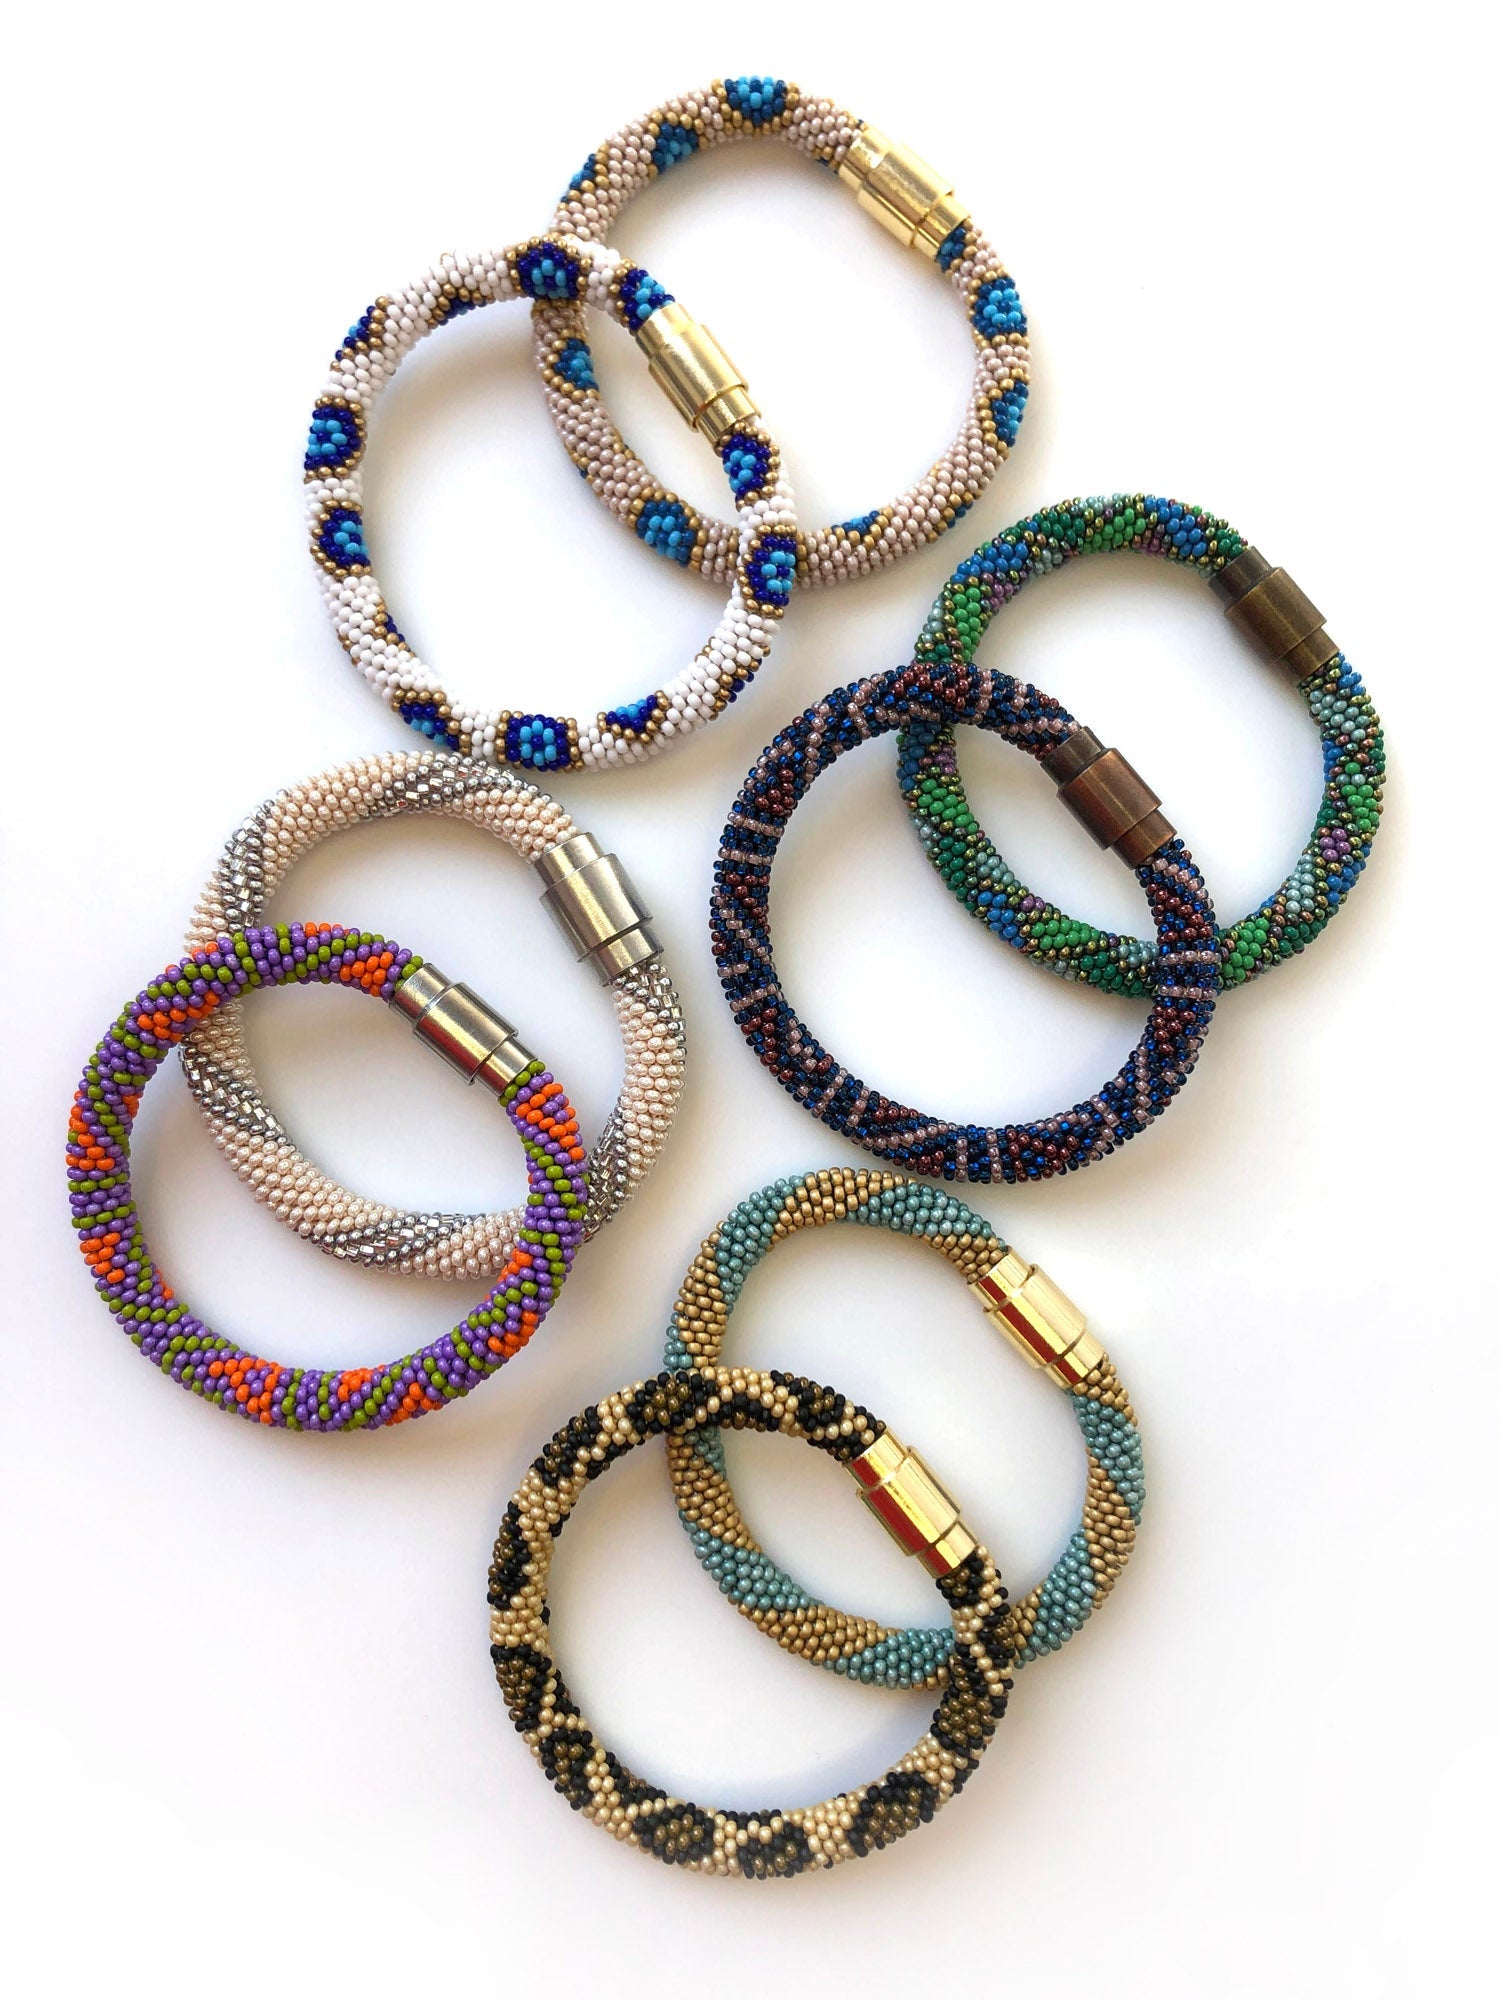 Variety of different colored bracelets with magnetic closures.